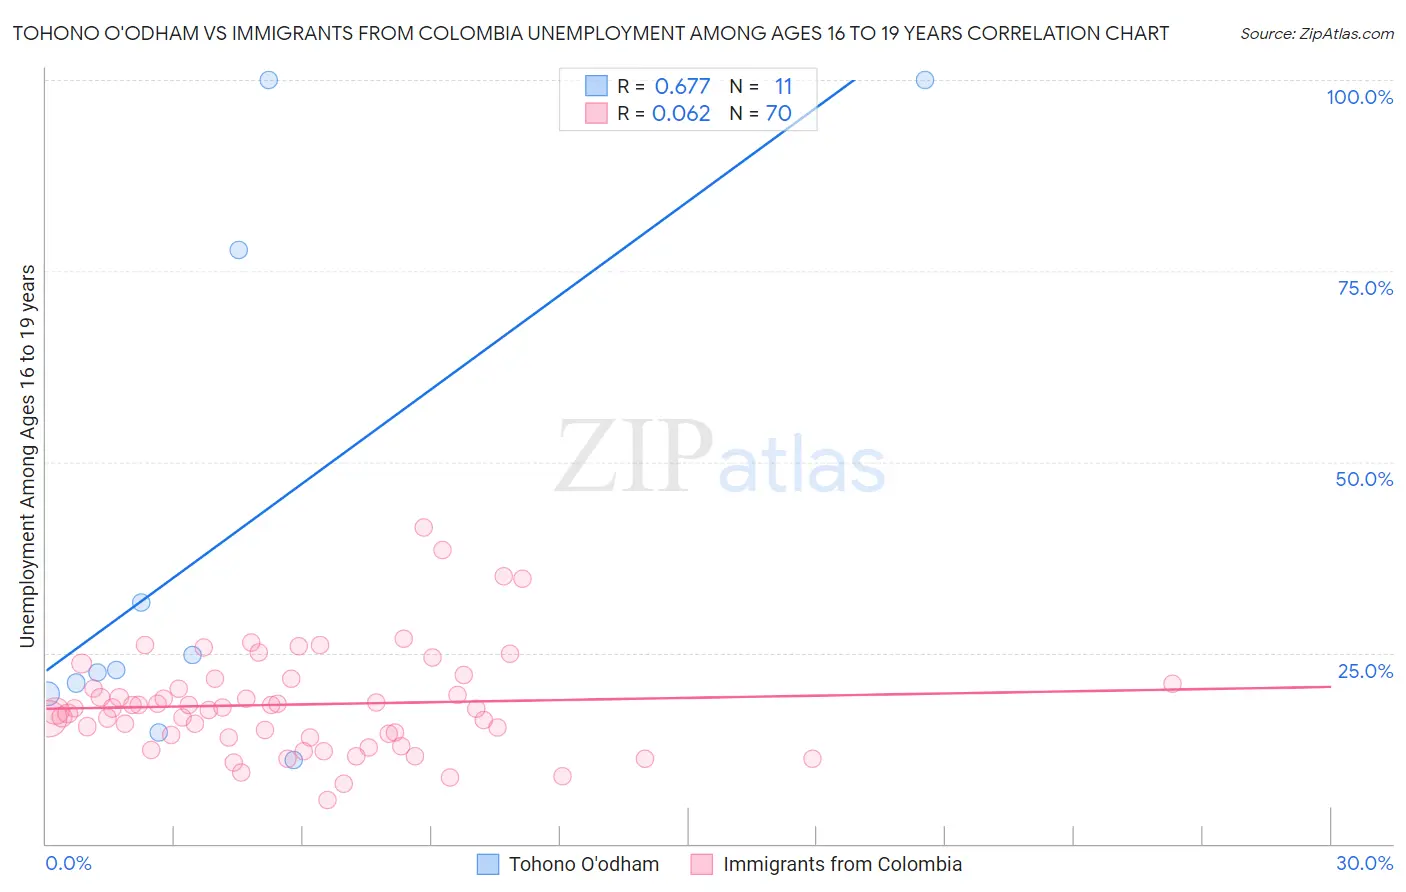 Tohono O'odham vs Immigrants from Colombia Unemployment Among Ages 16 to 19 years